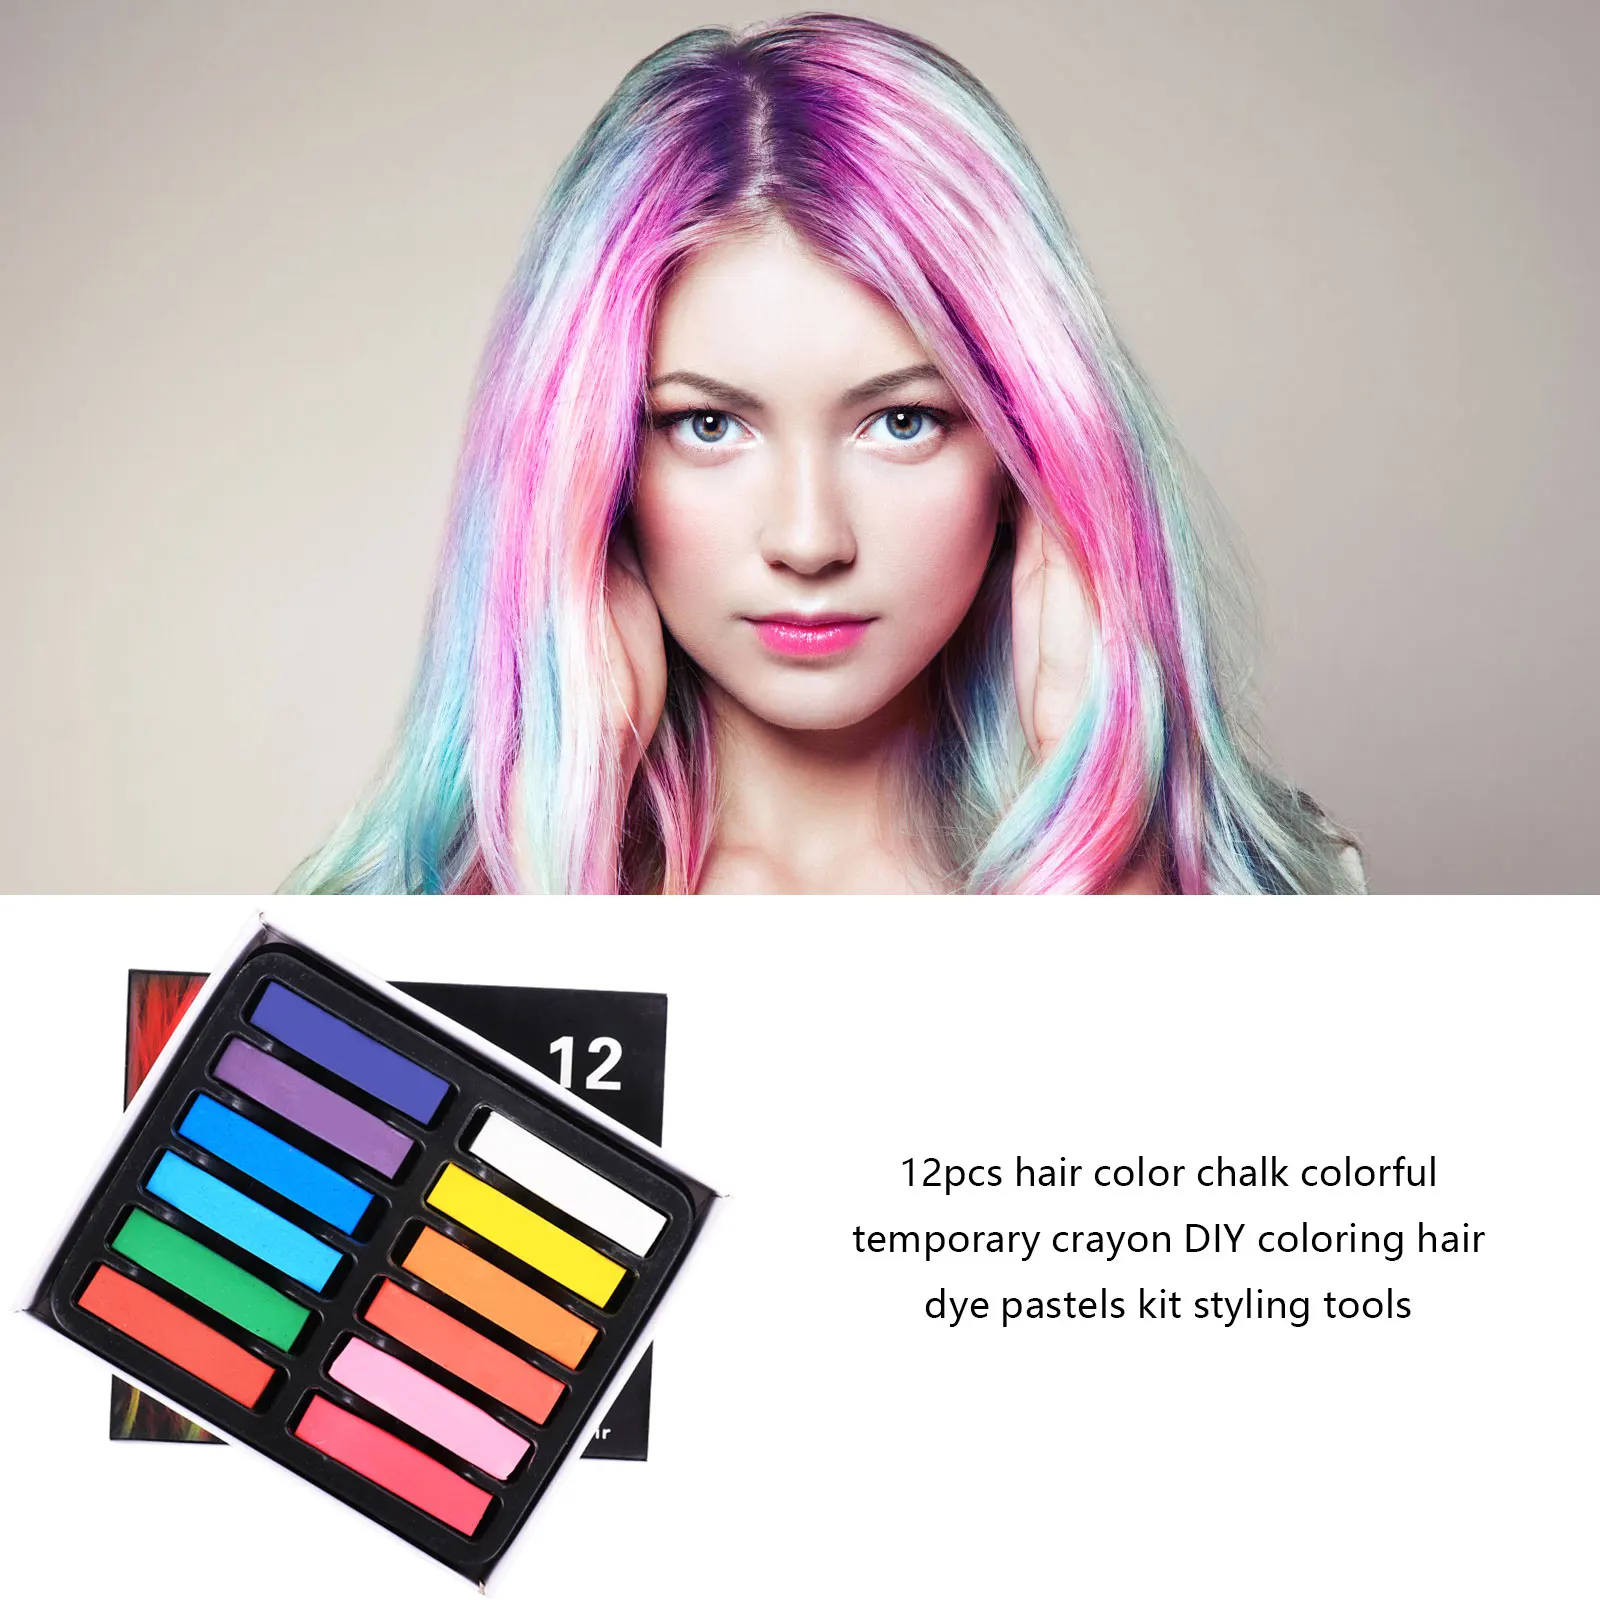 

Temporary 24 Colors Crayons For Hair Non-toxic Hair Color Chalk Dye Pastels Stick DIY Styling Tools For Girls Kids Party Cosplay